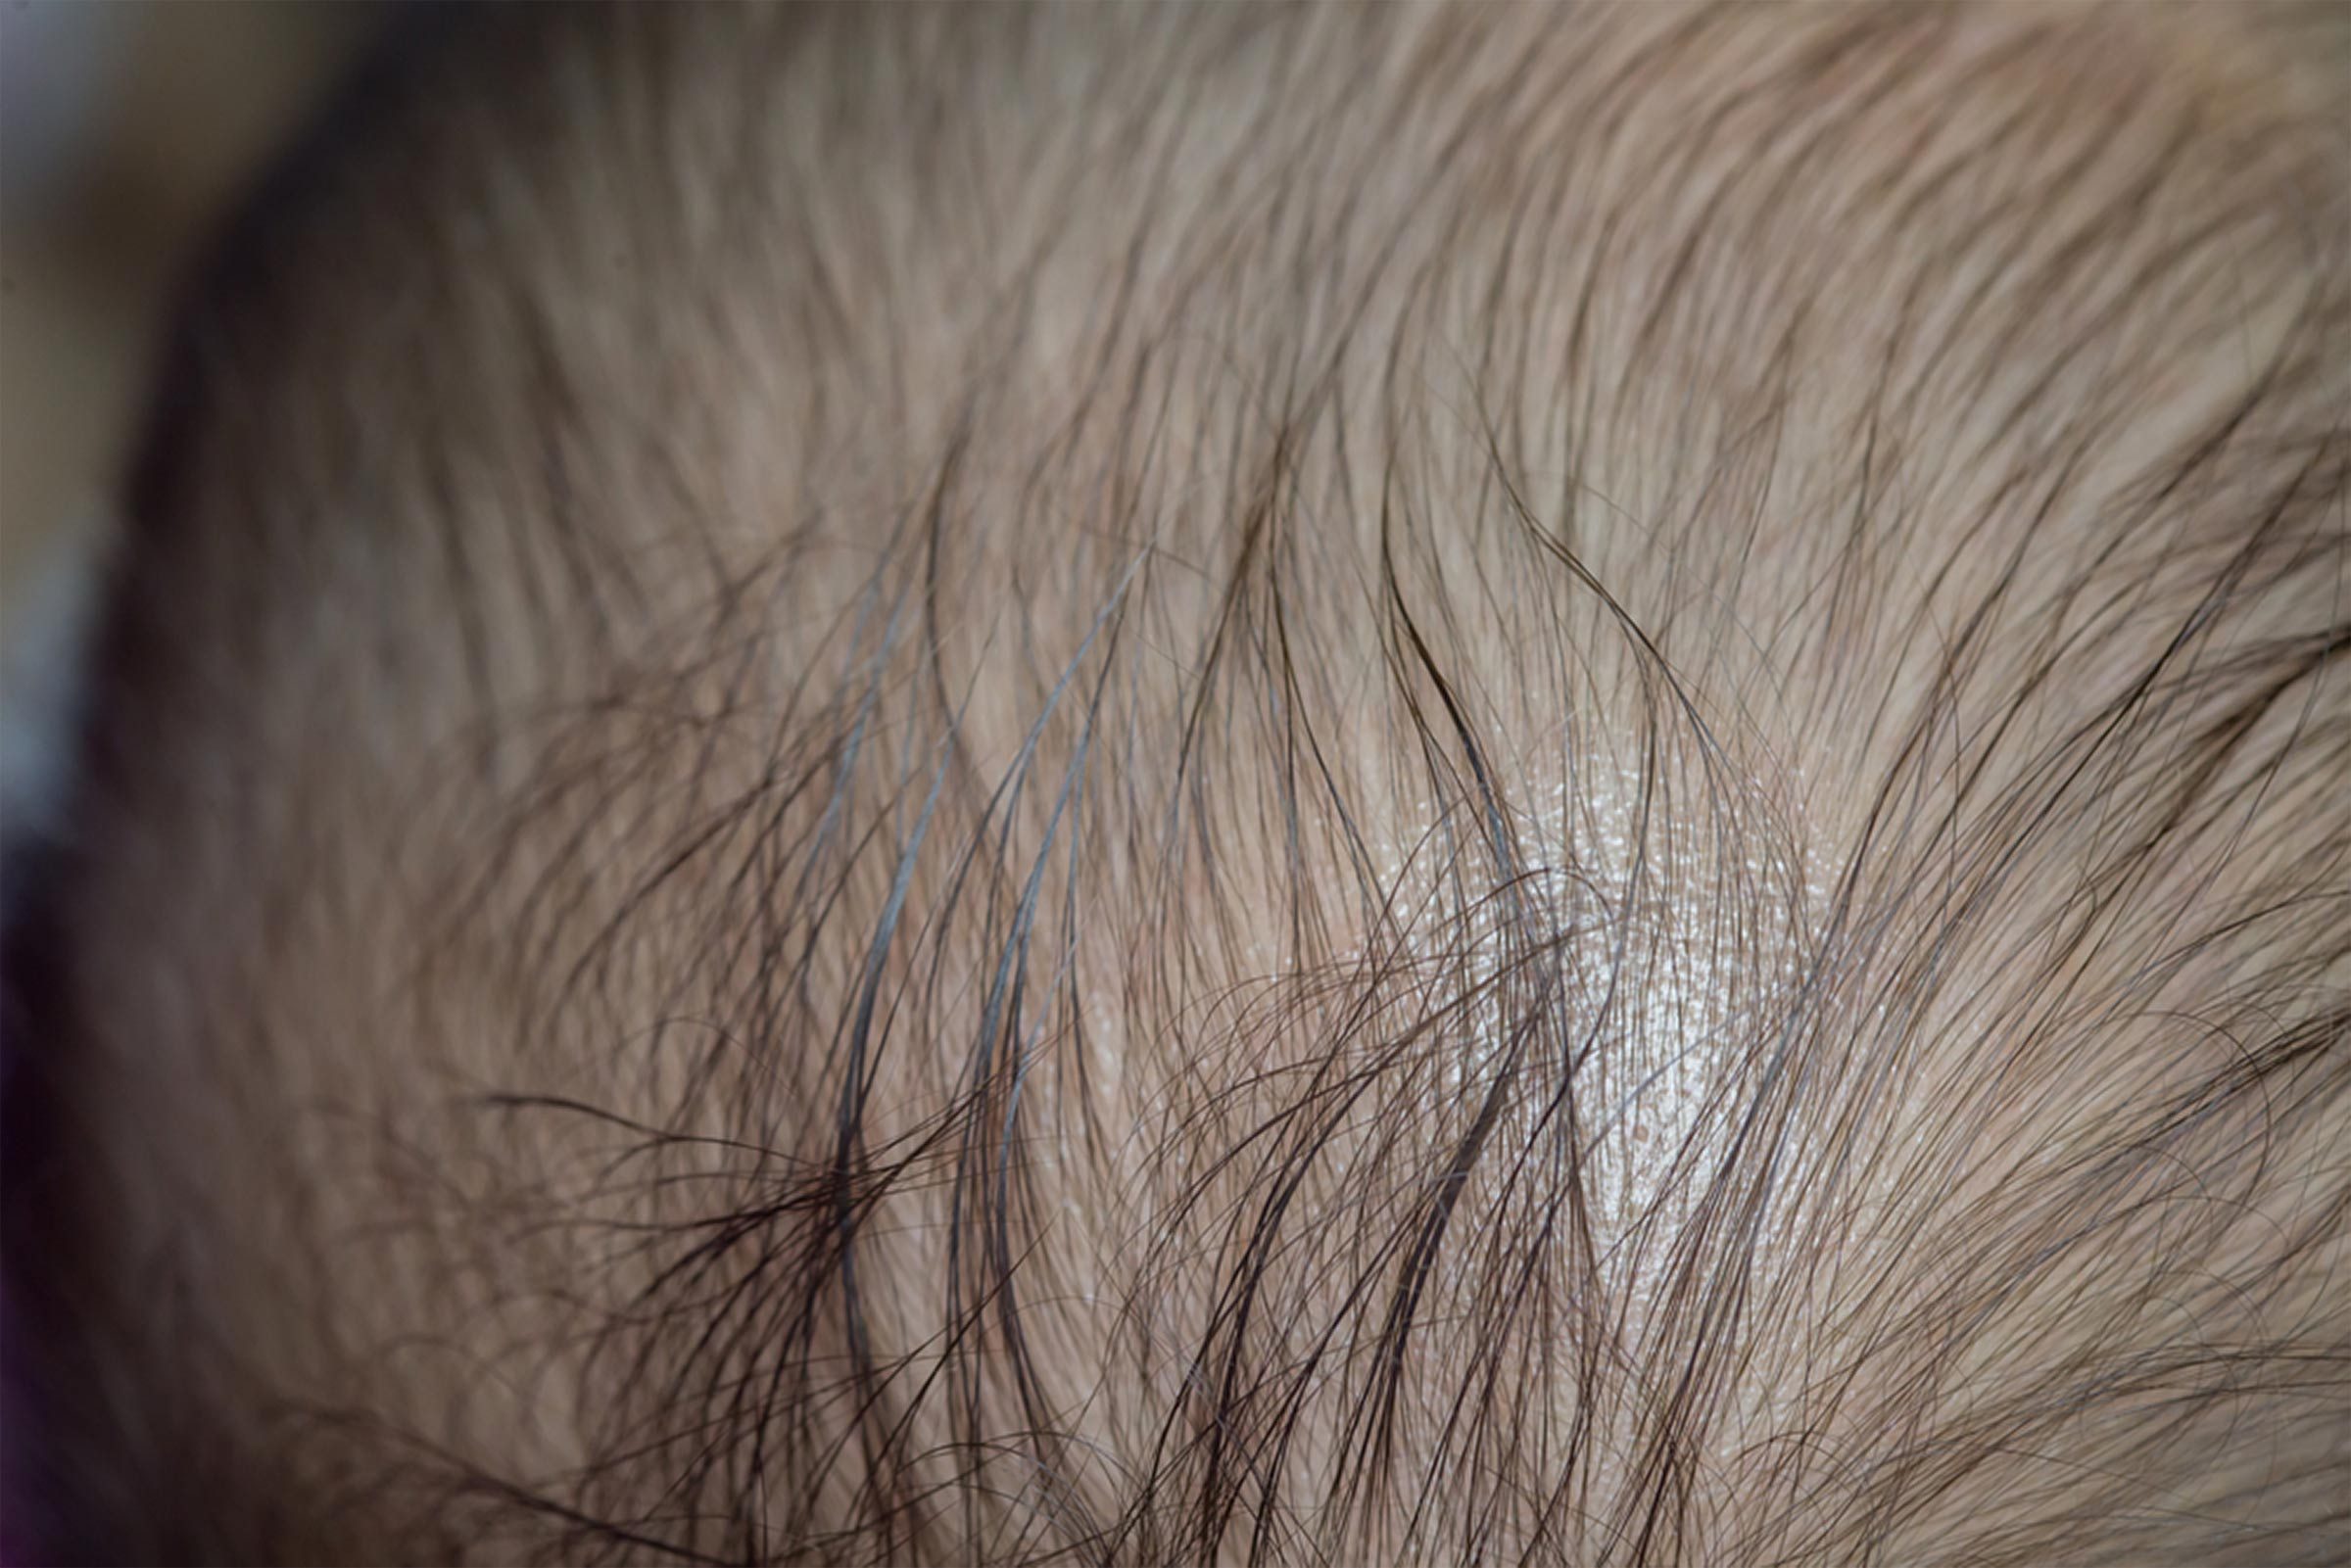 20 Reasons for Your Itchy Scalp (Besides Head Lice)